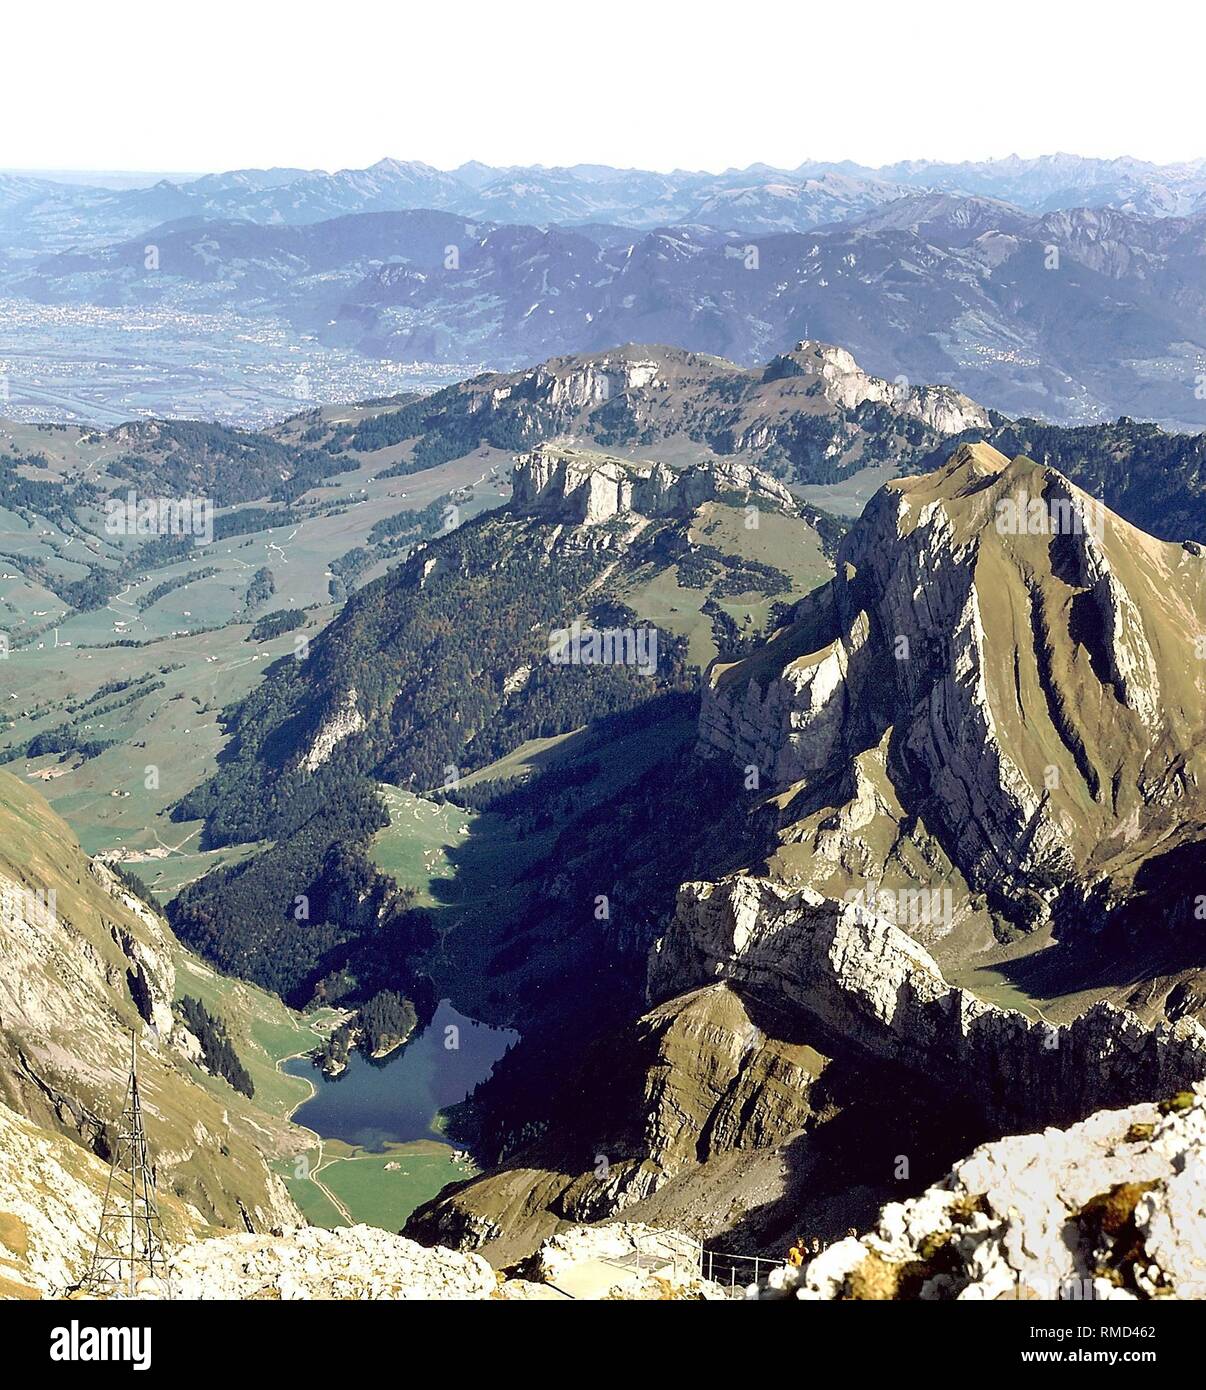 View from the Saentis (2500 meters altitude) to the Alpstein area and the Rhine Valley. Stock Photo